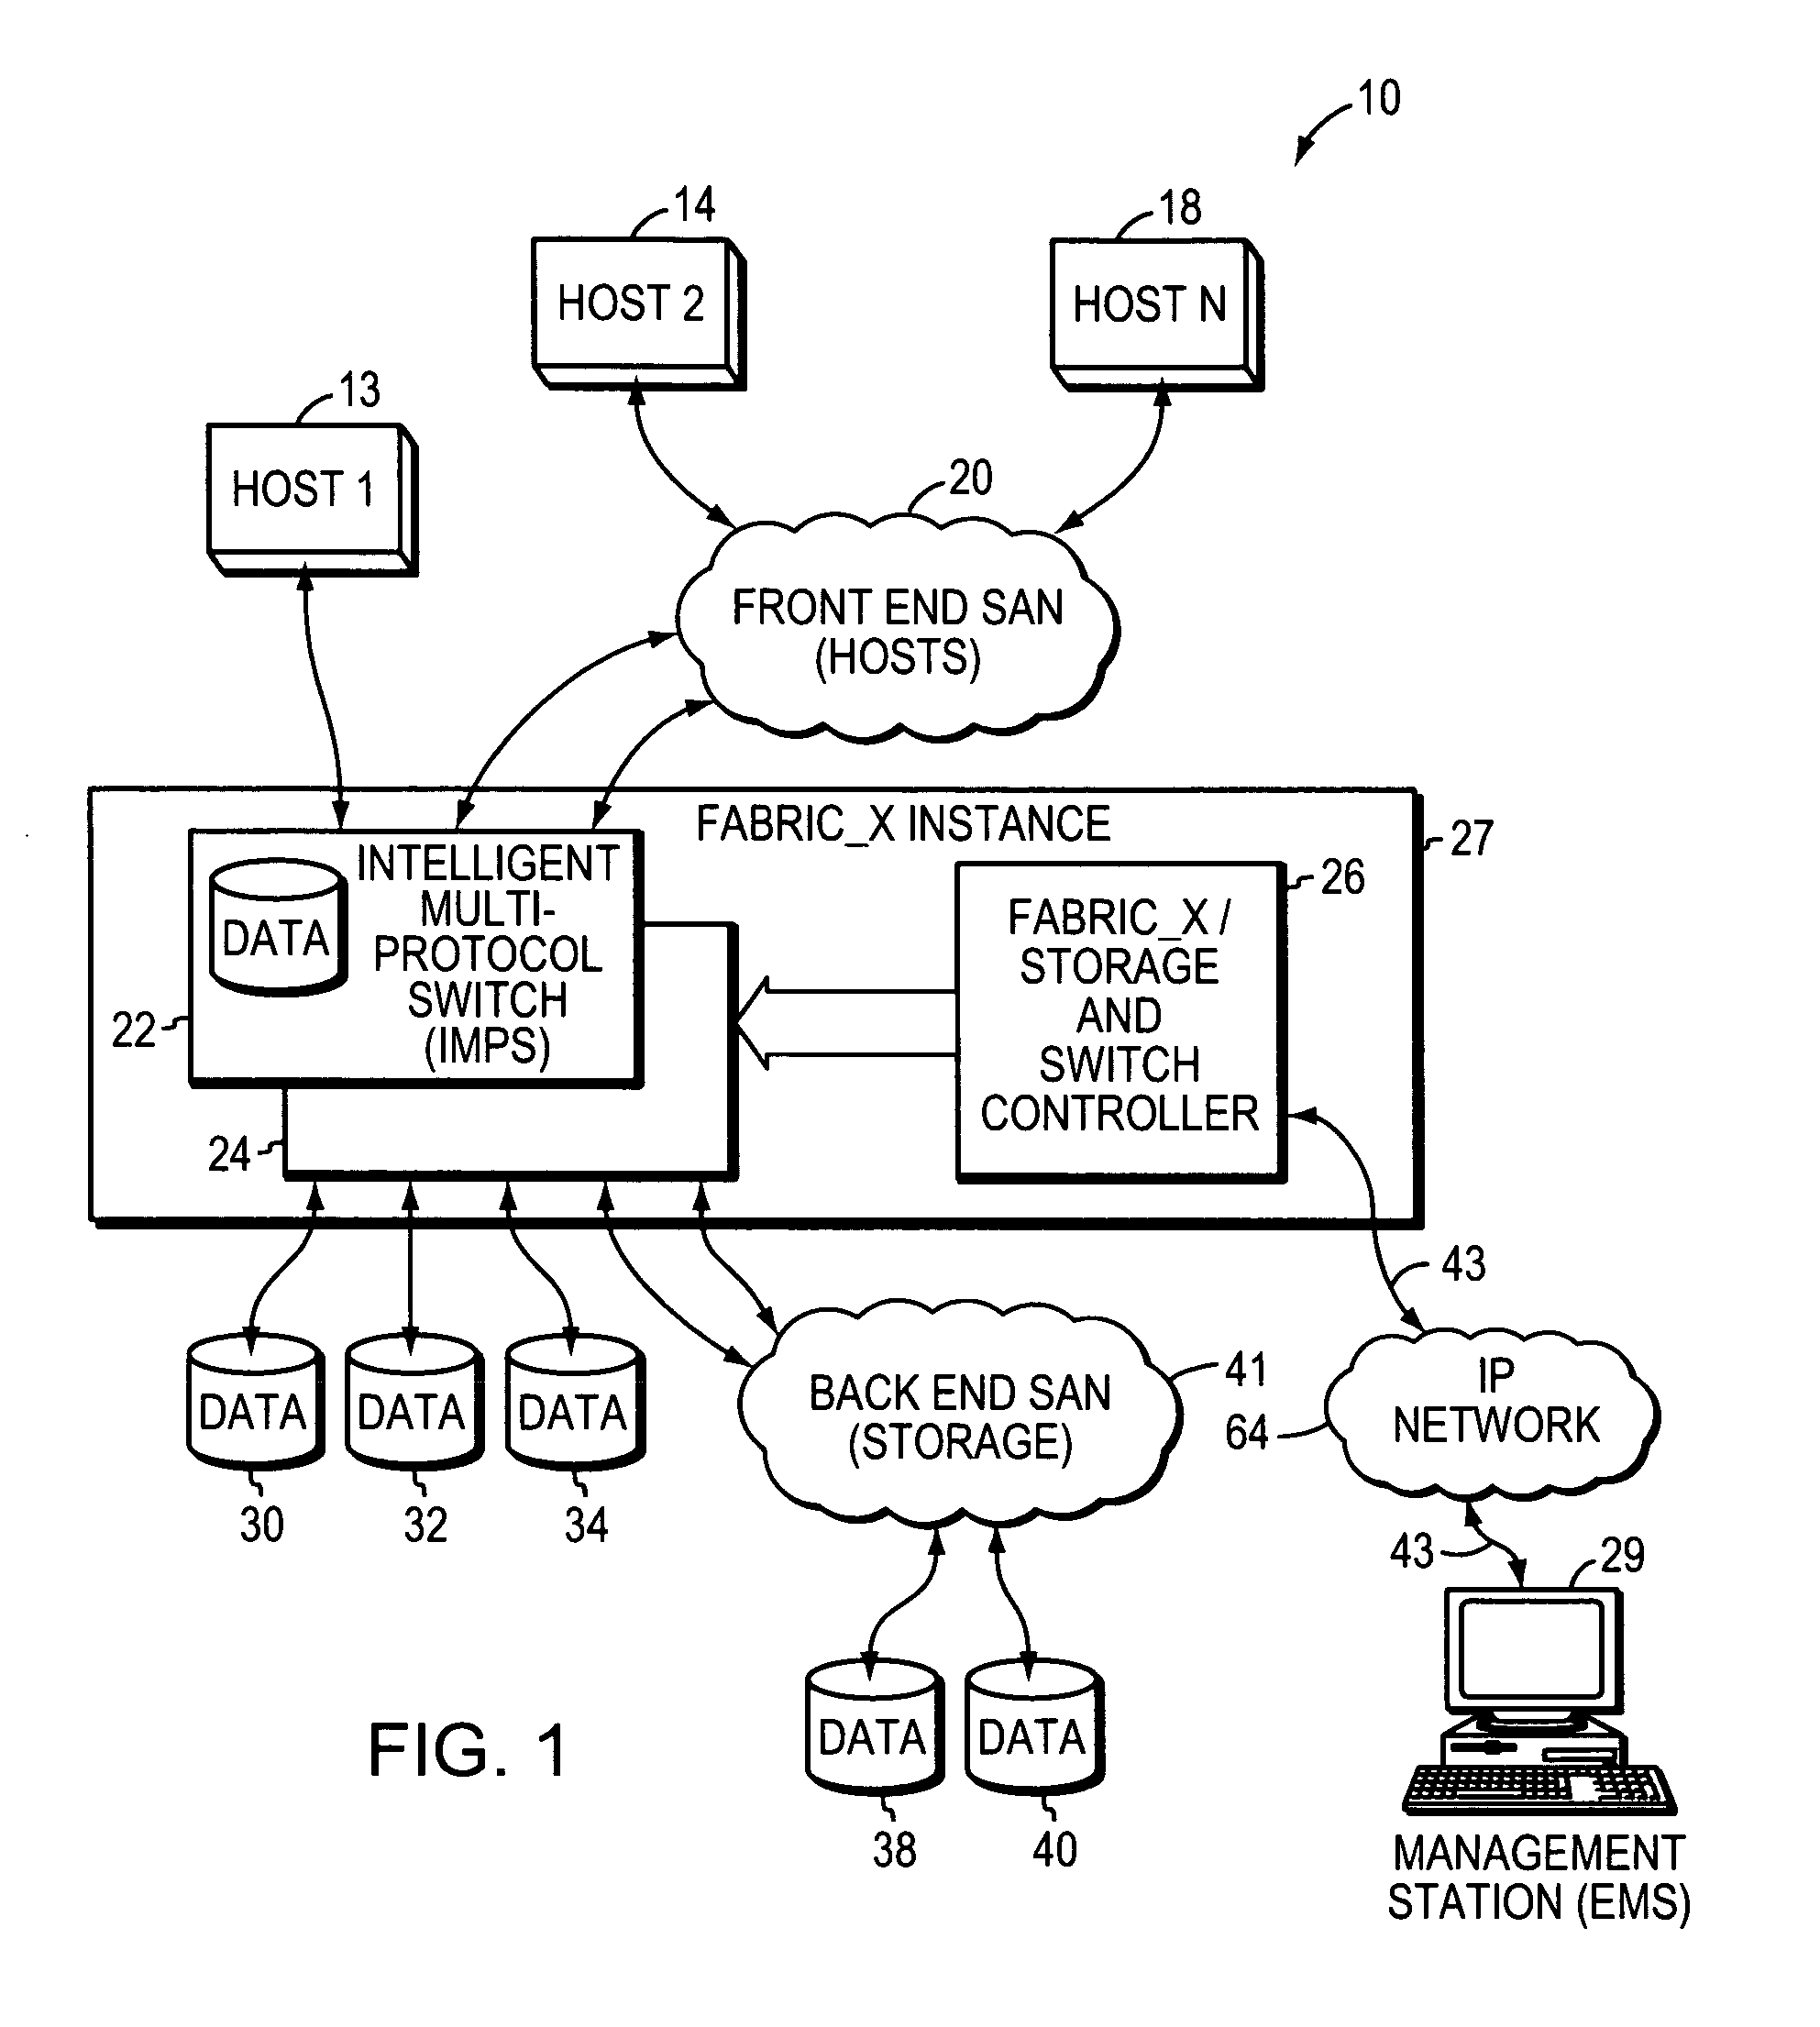 System and method for managing storage networks and providing virtualization of resources in such a network using one or more ASICs